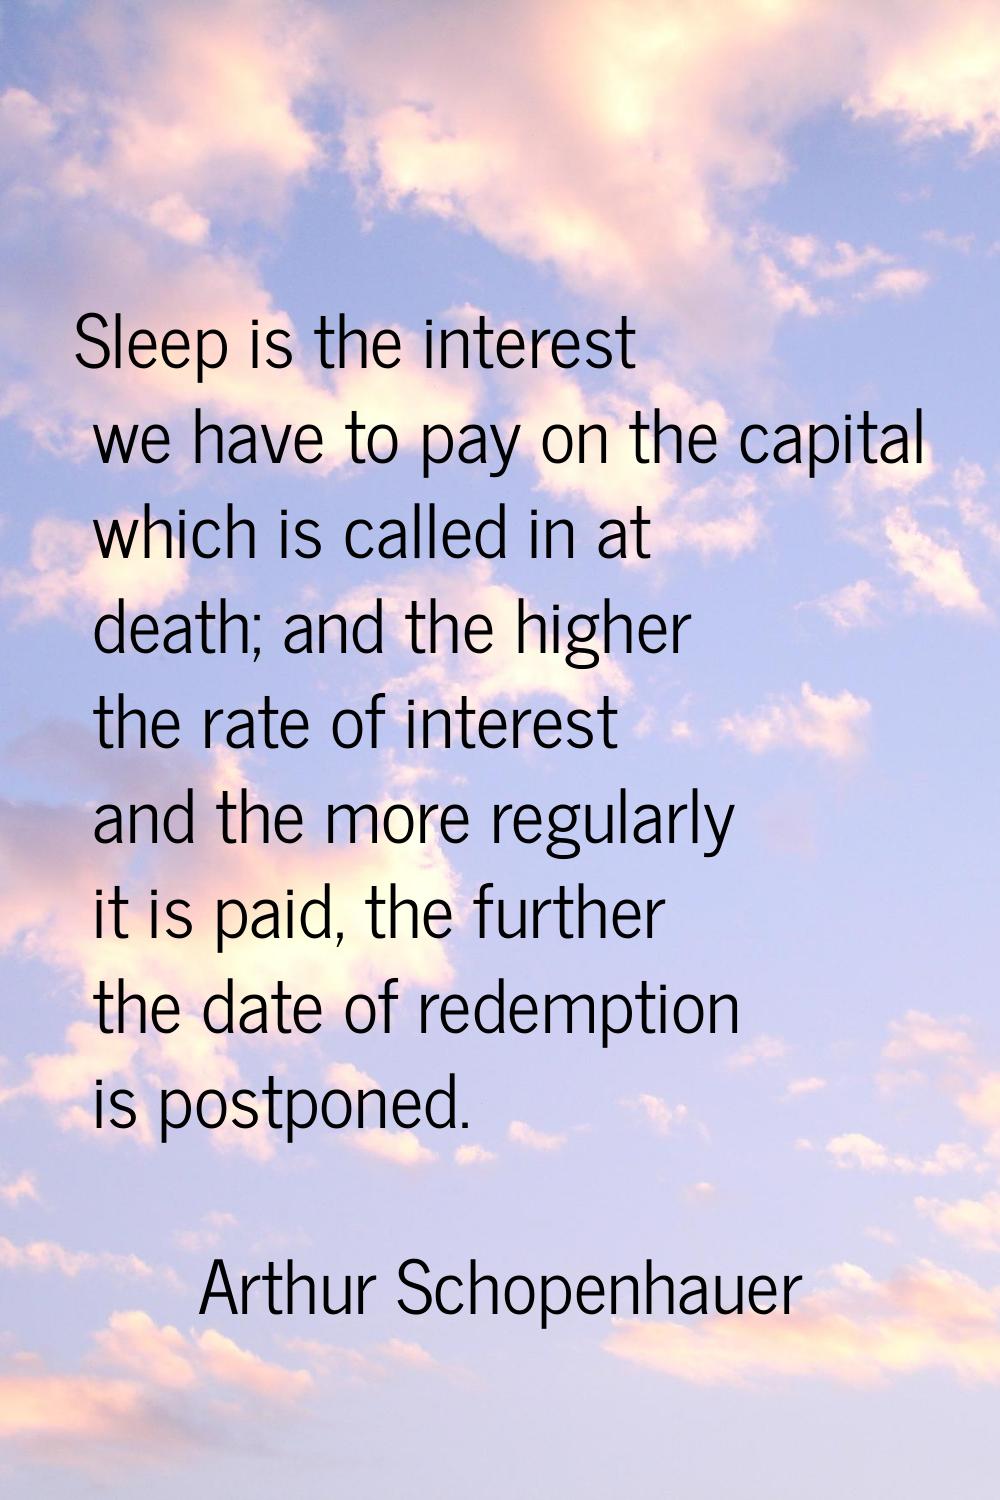 Sleep is the interest we have to pay on the capital which is called in at death; and the higher the